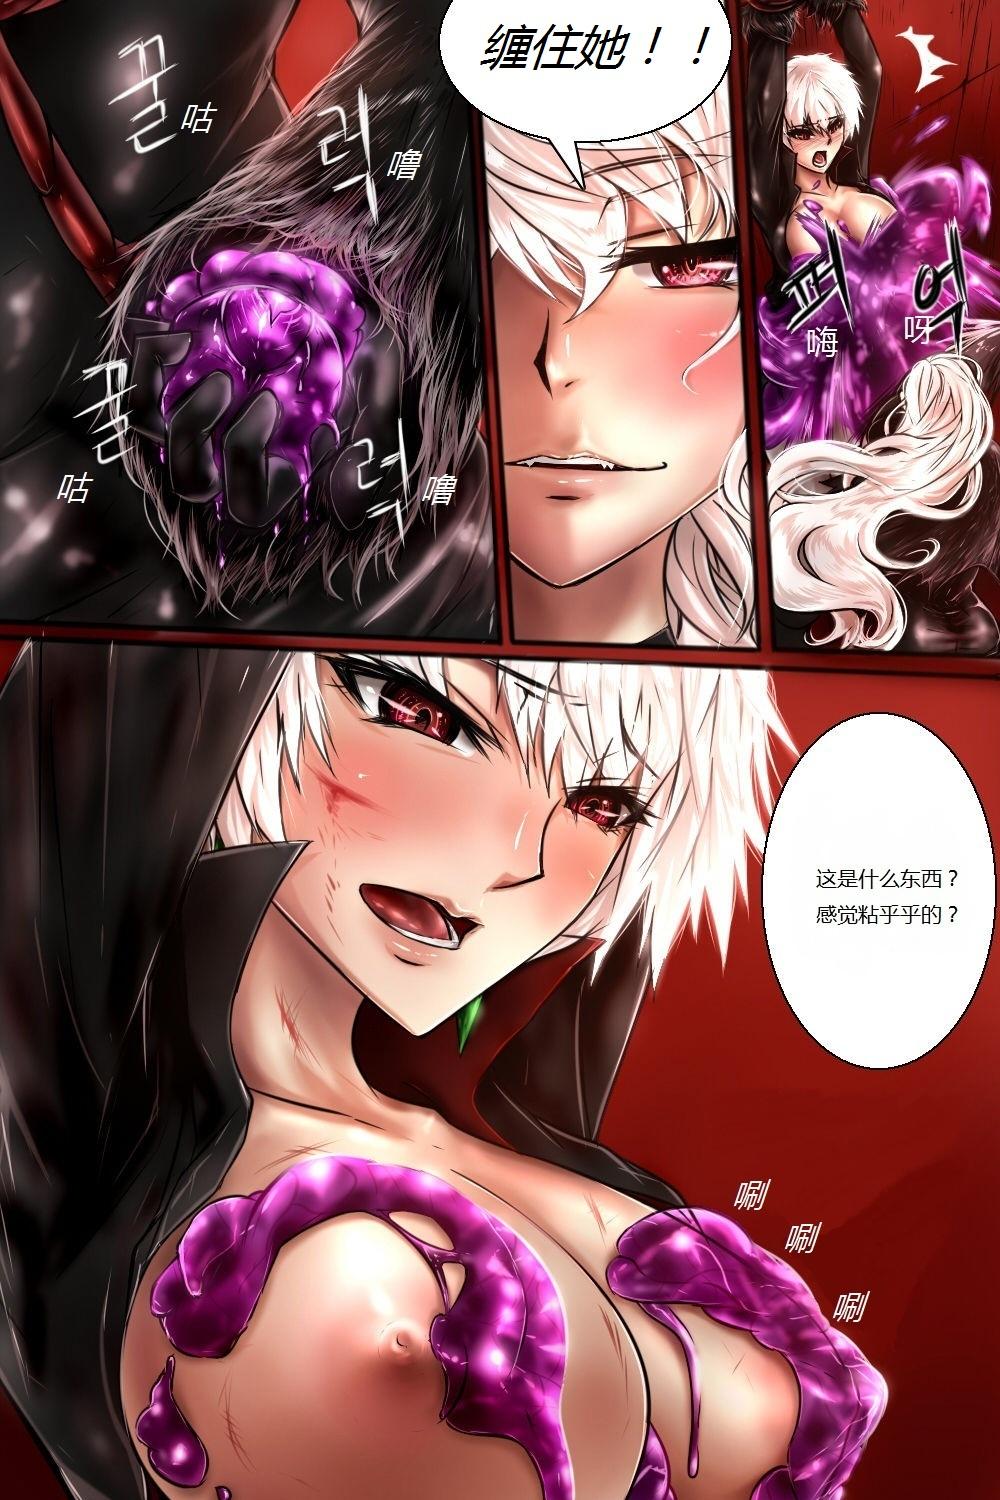 Novia 여왕x귀족 후반 - Dungeon fighter online Gay - Page 7